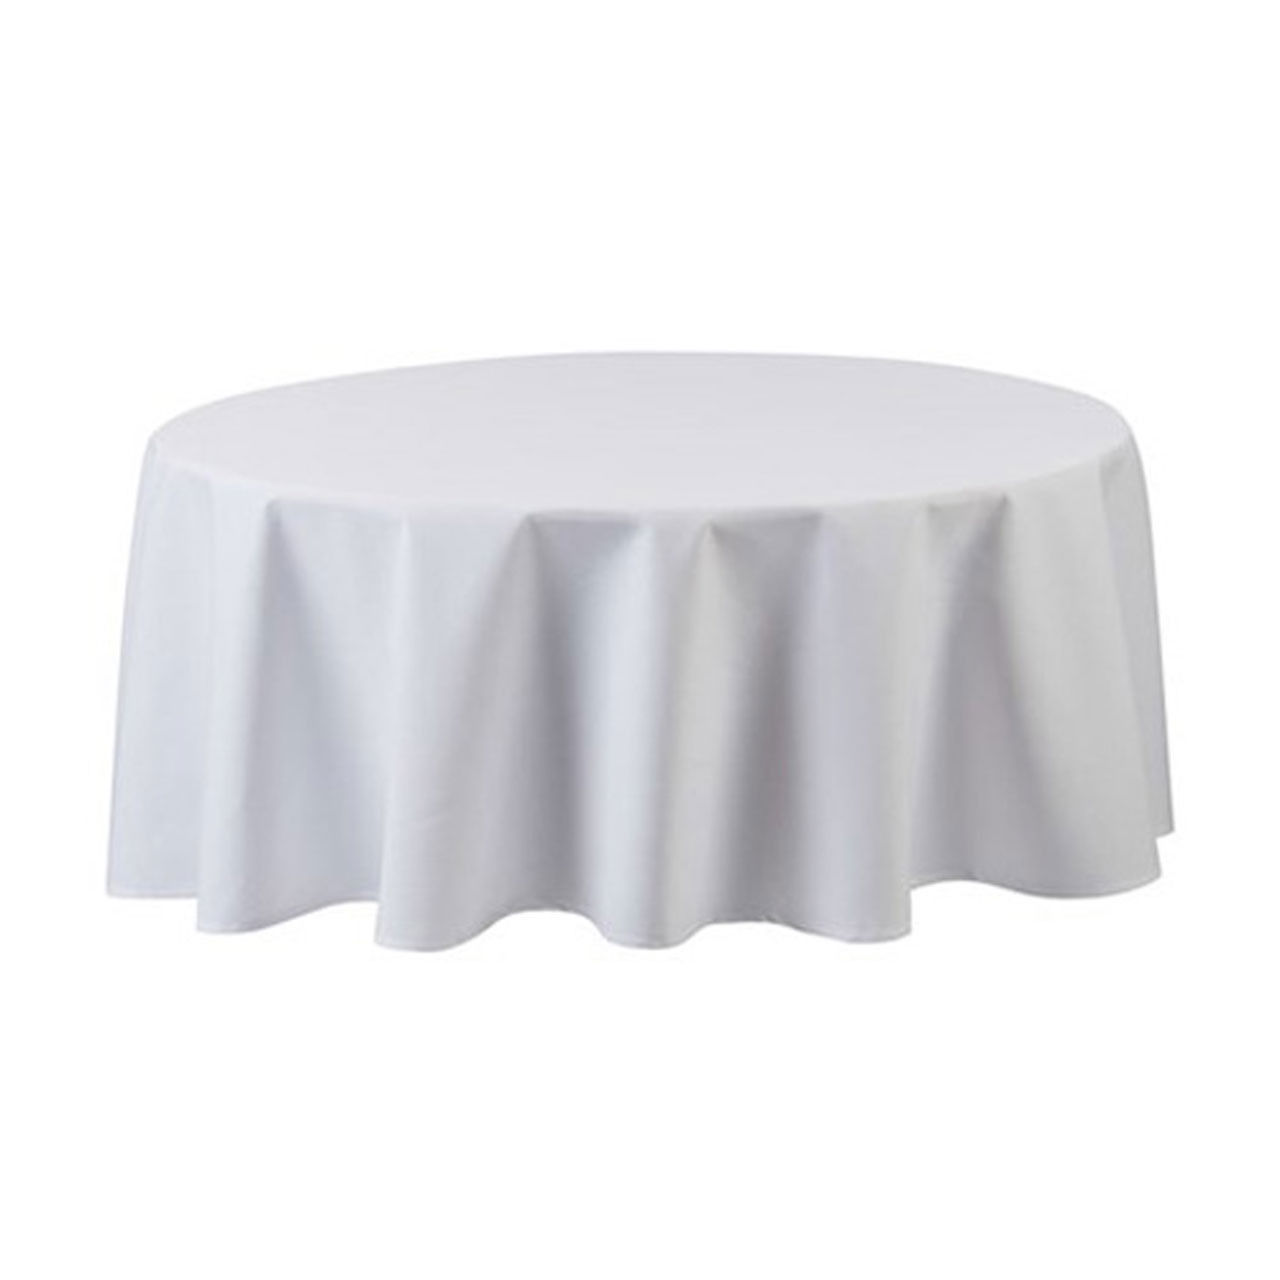 What material is the 120 round tablecloth made of?